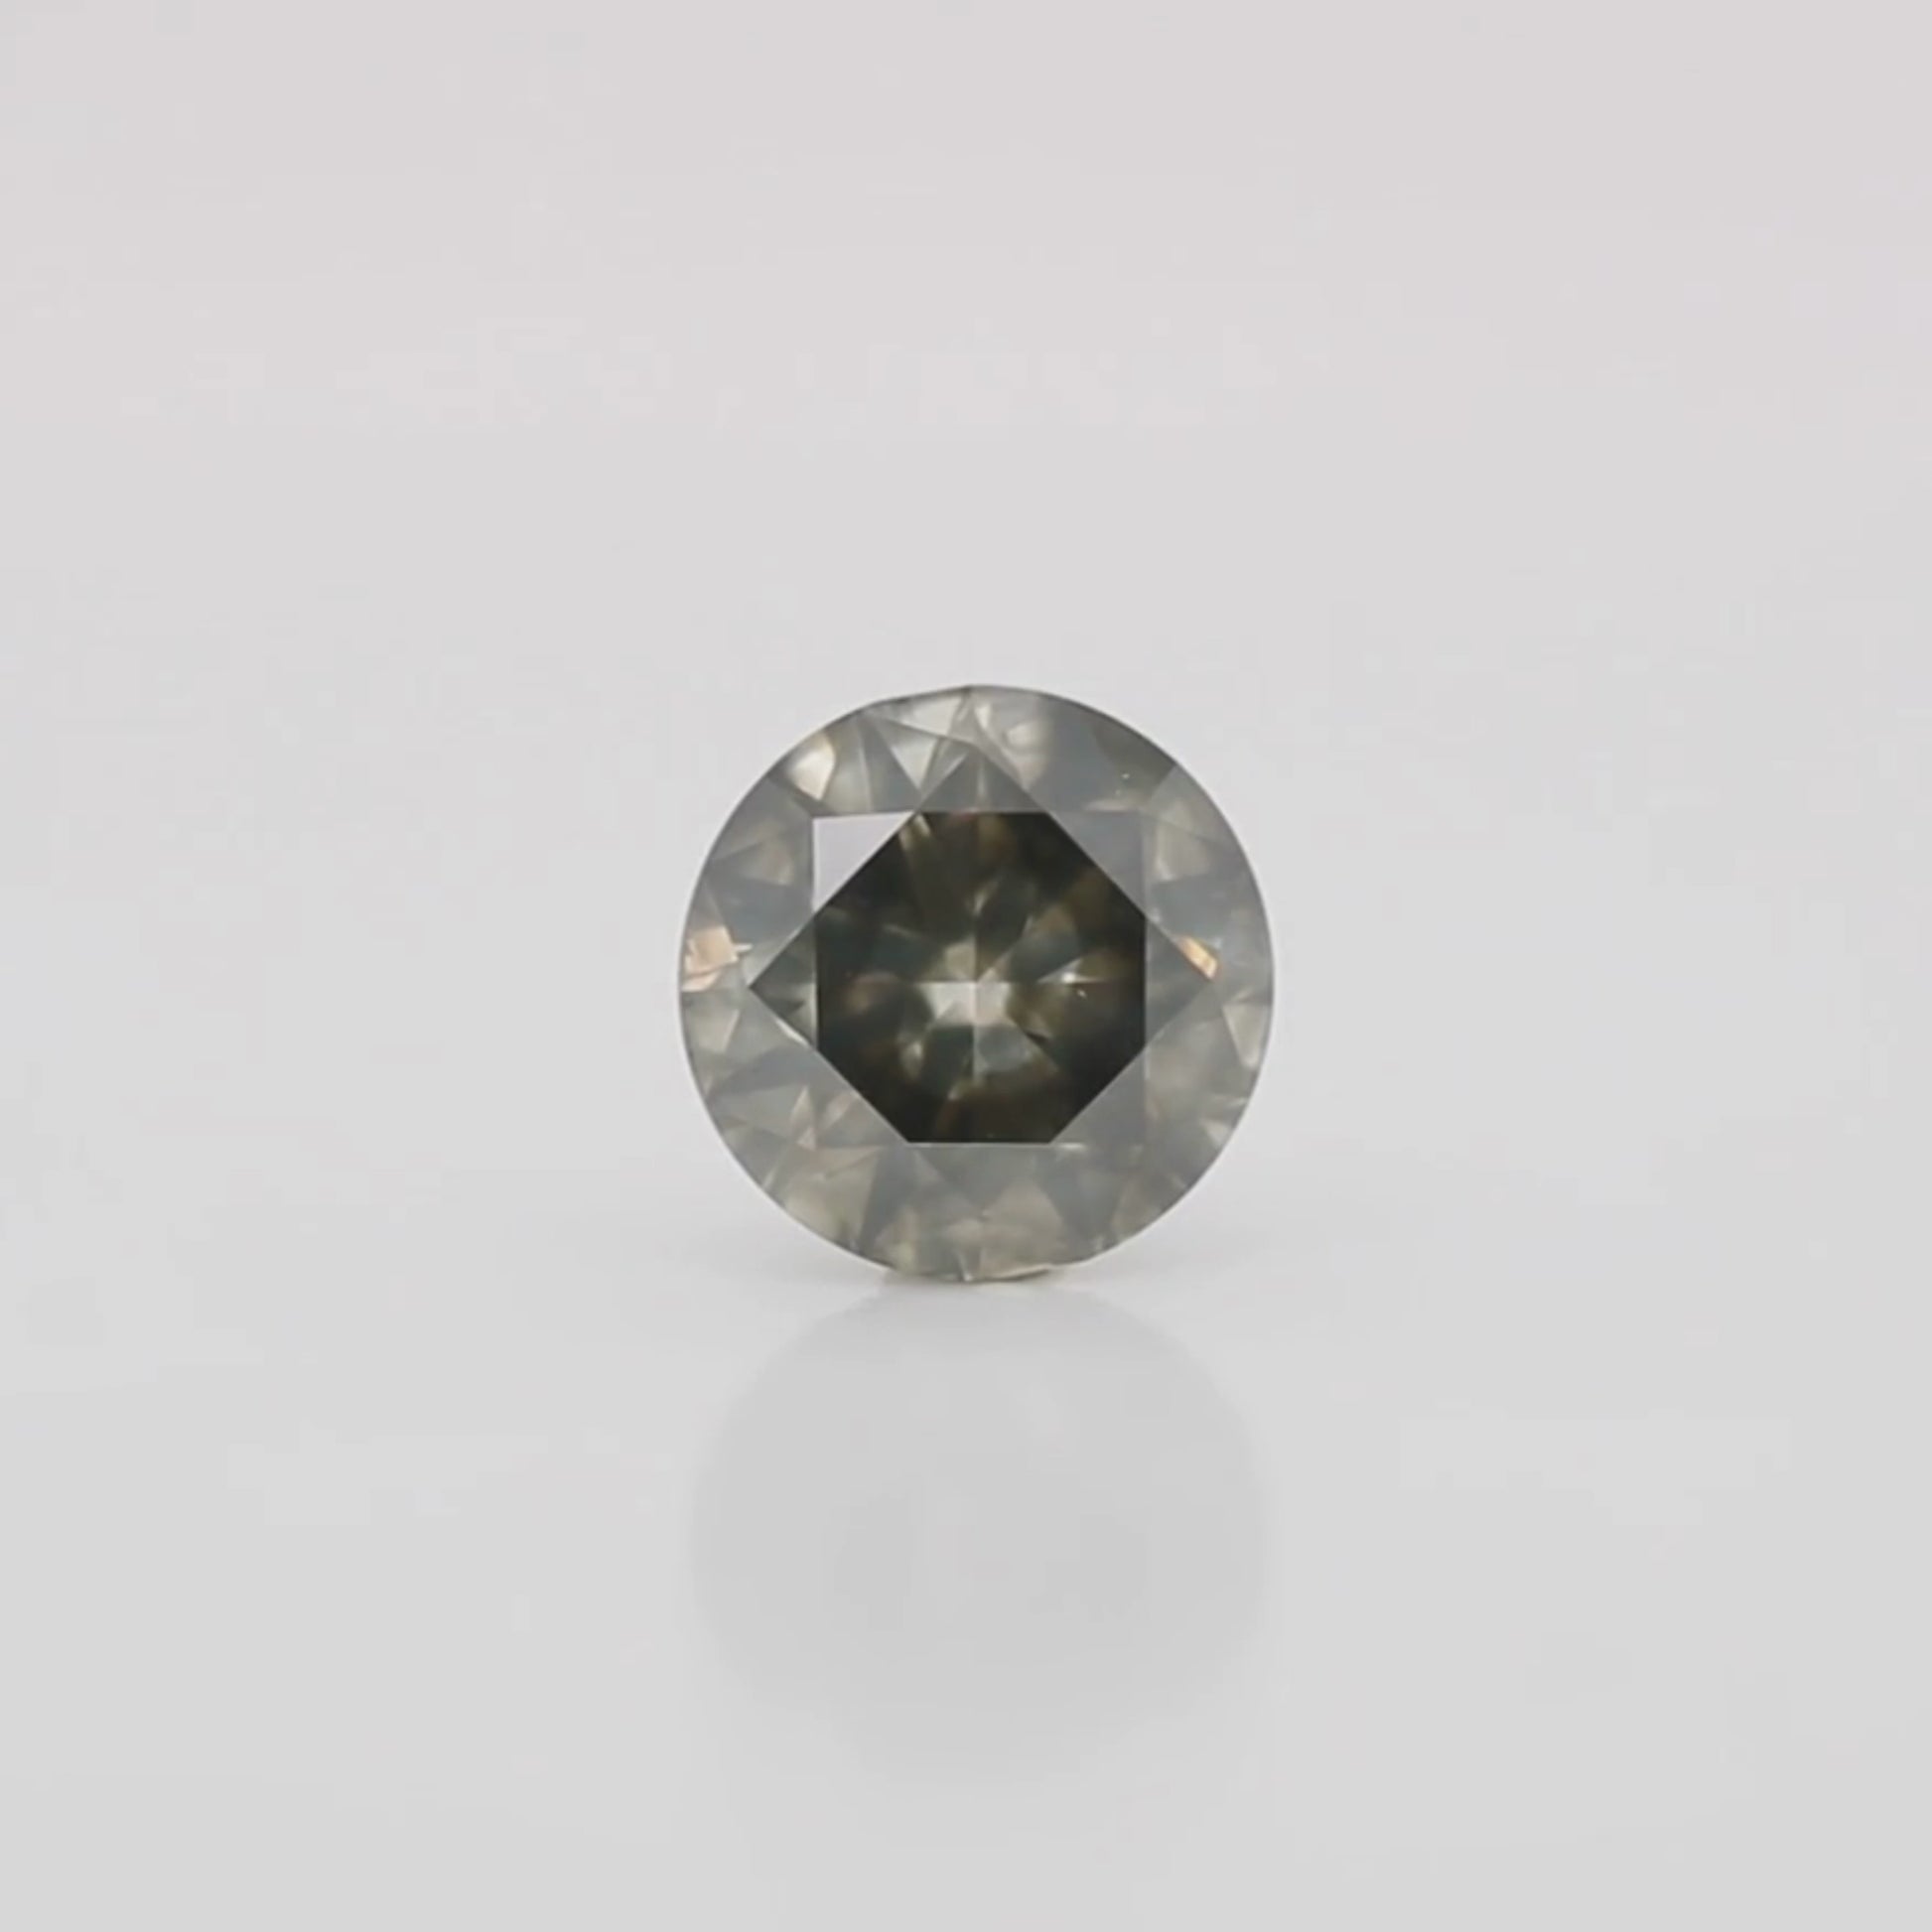 3.05 Carat Round Dark and Clear Champagne Brown Celestial Diamond for Custom Work - Inventory Code SCR305